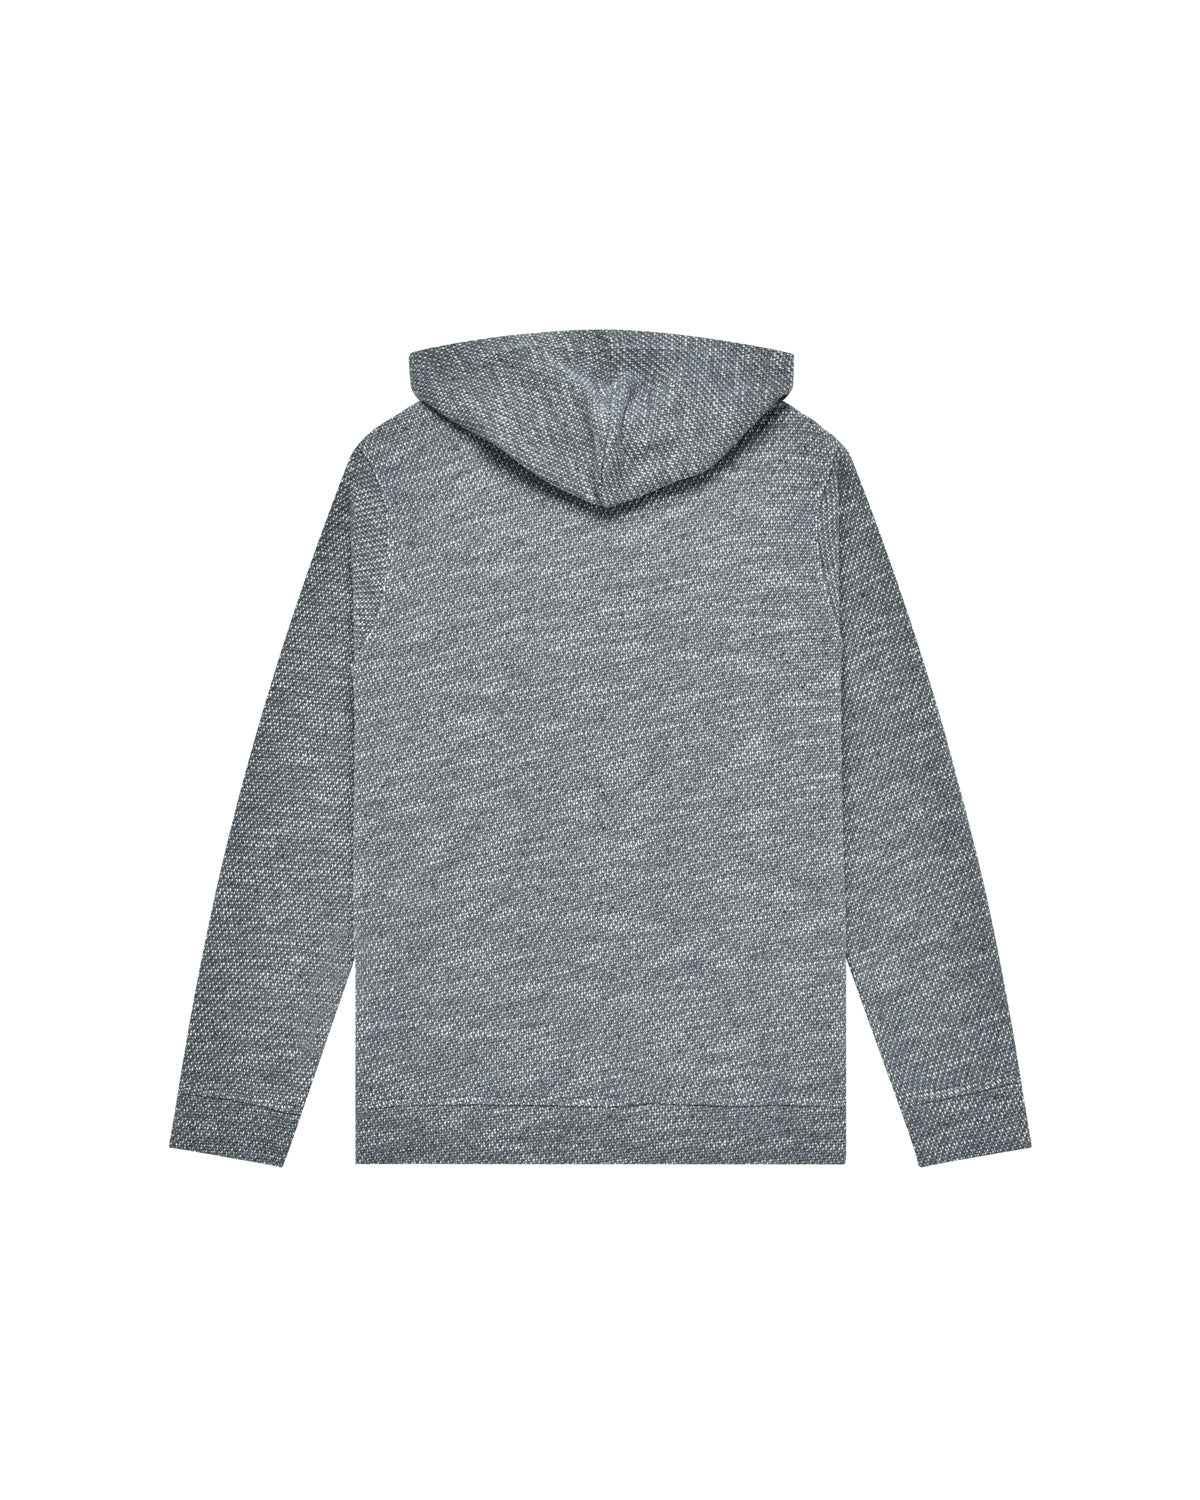 Man | Anthracite-coloured knitted sweater with hood